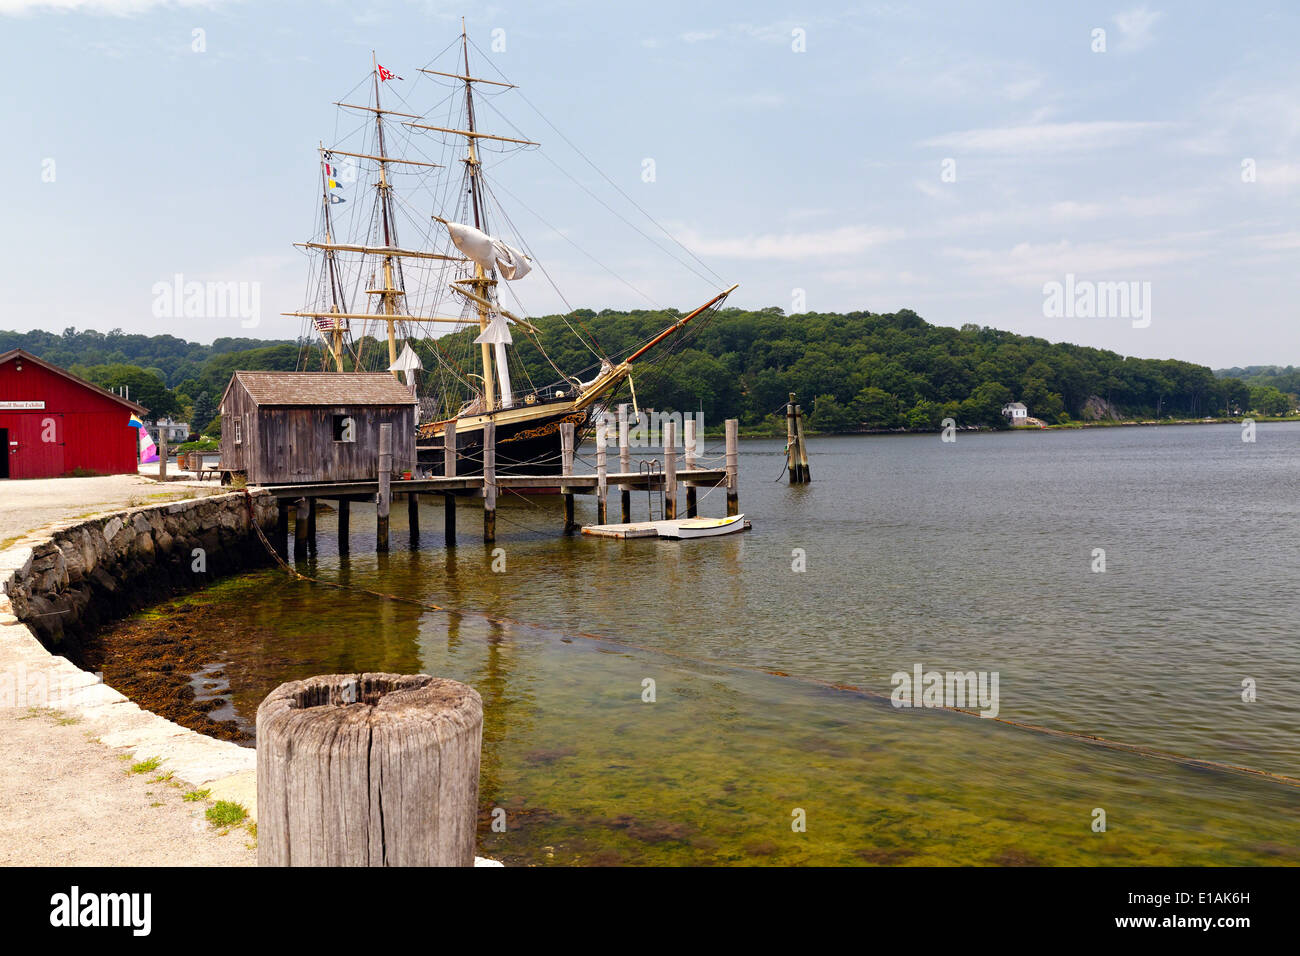 Pier with a Tall Ship, Mystic Seaport, Connecticut Stock Photo